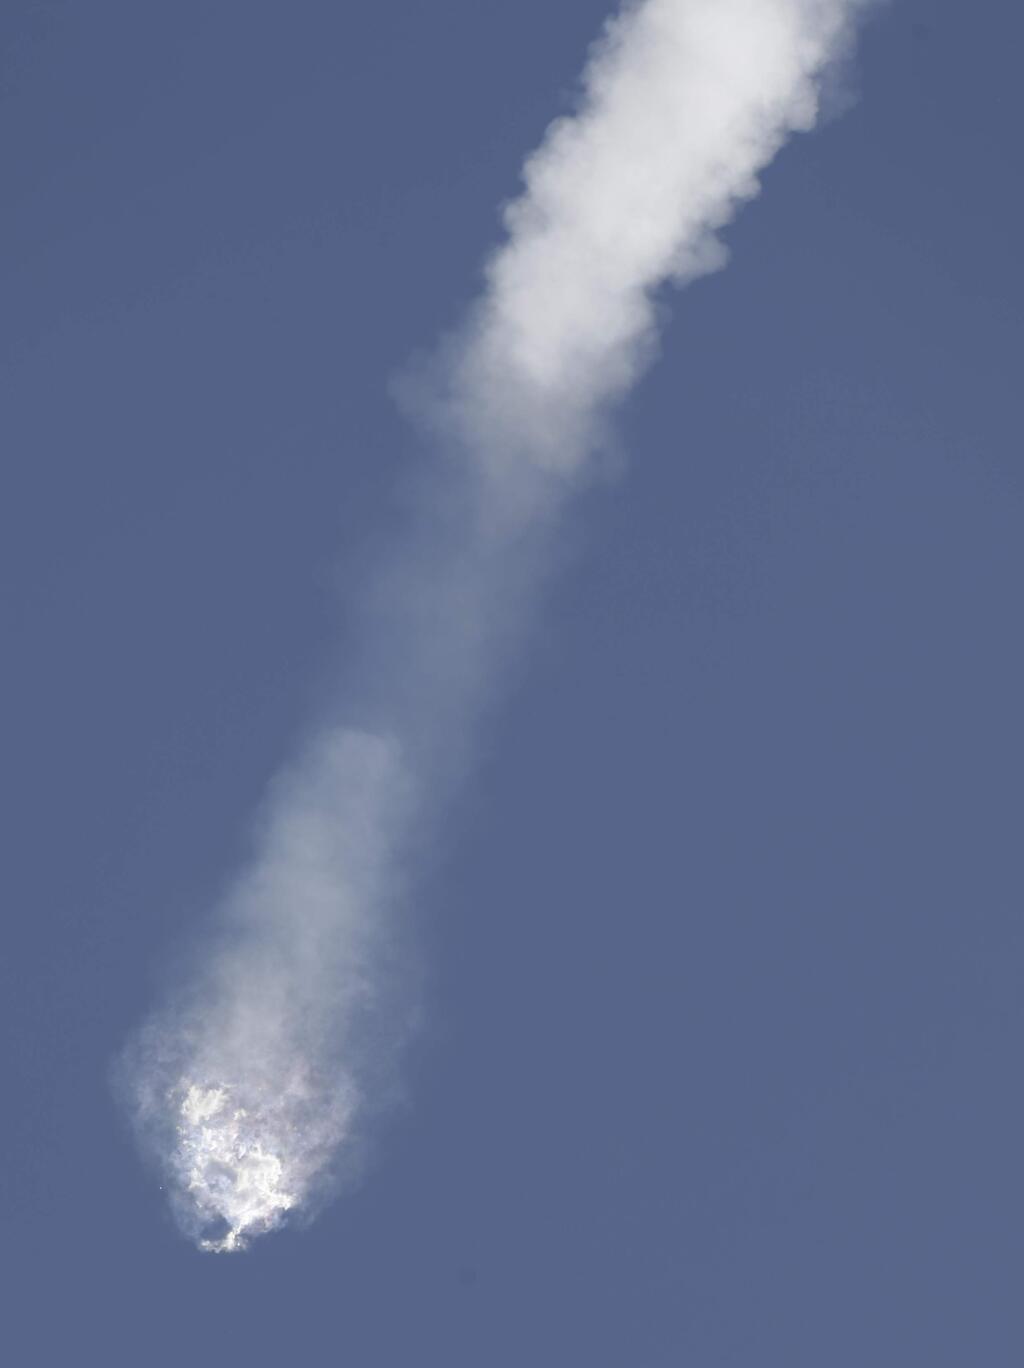 The SpaceX Falcon 9 rocket and Dragon spacecraft breaks apart shortly after liftoff at the Cape Canaveral Air Force Station in Cape Canaveral, Fla., Sunday, June 28, 2015. The rocket was carrying supplies to the International Space Station. (AP Photo/John Raoux)